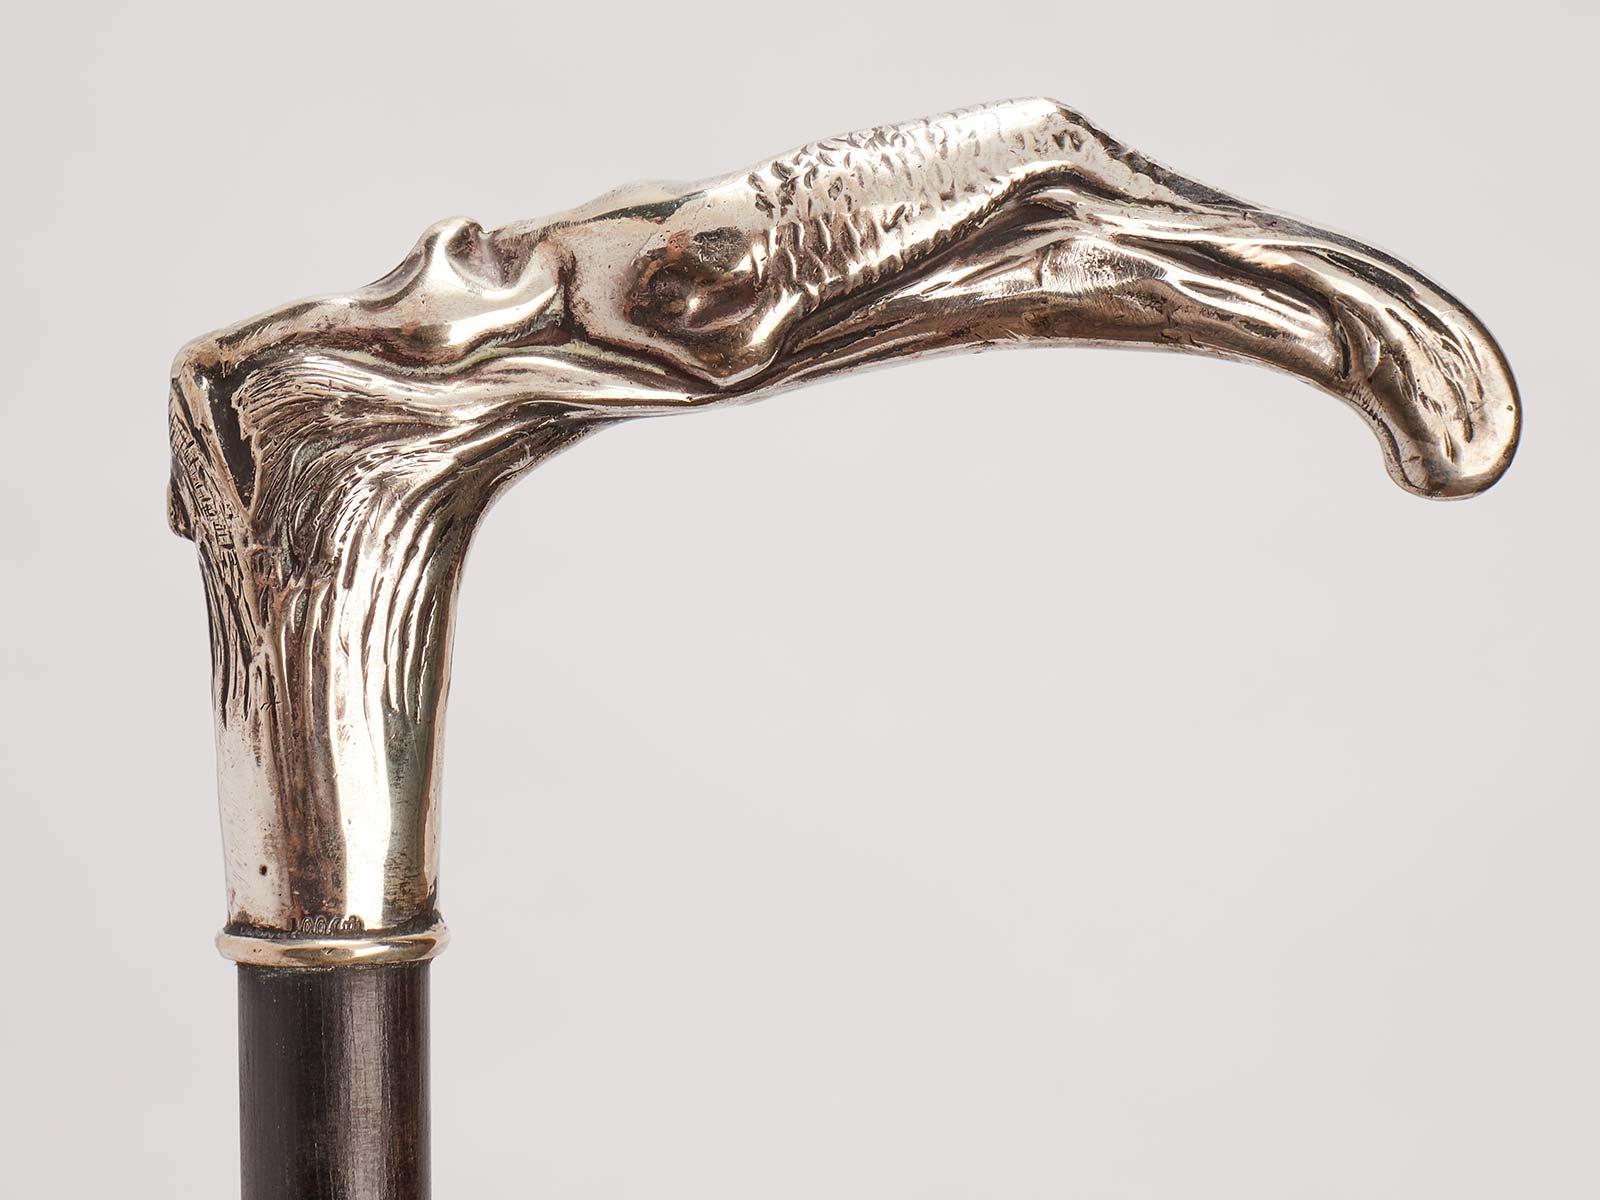 20th Century Silver Handle Walking Stick, Germany 1900